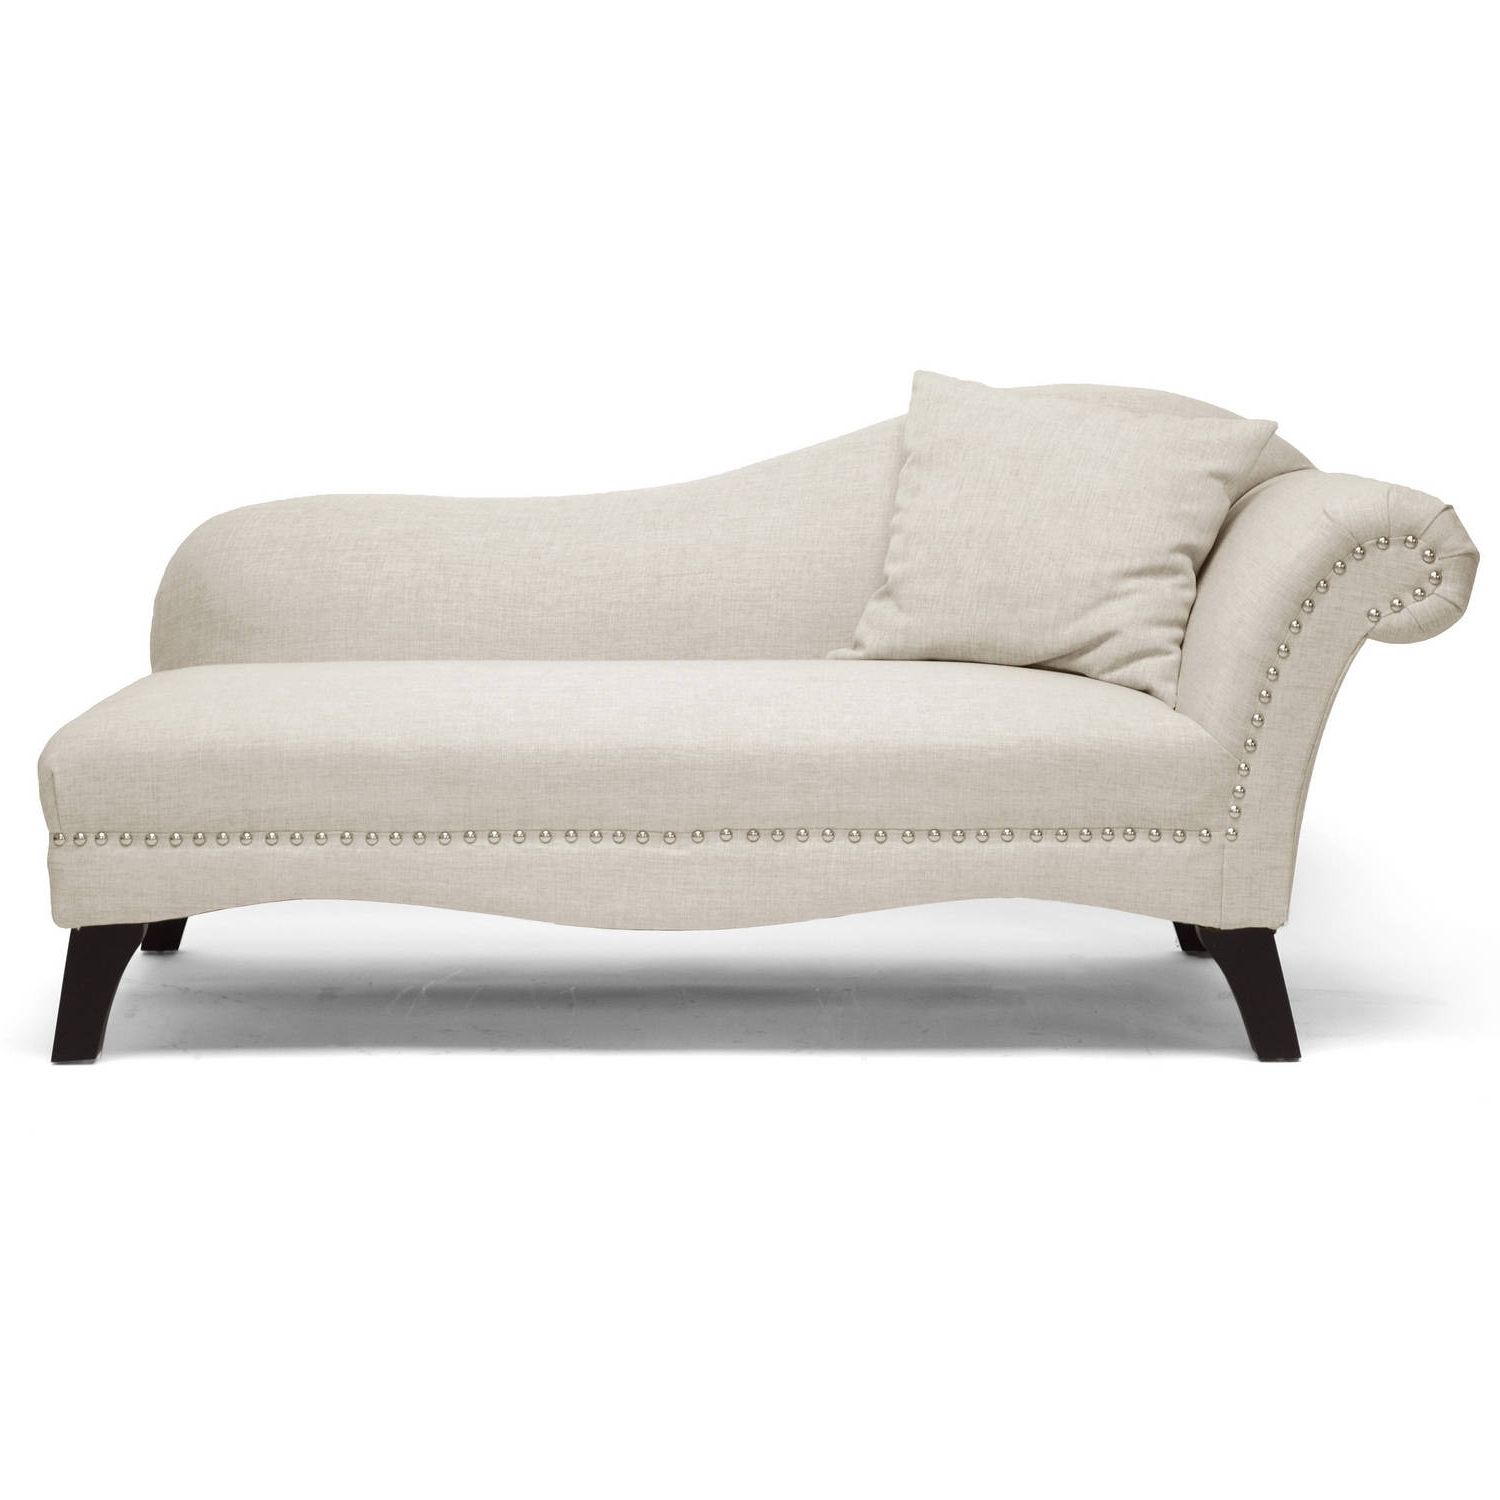 White Leather Chaise Lounges Pertaining To 2018 Chaise Lounges – Walmart (View 11 of 15)